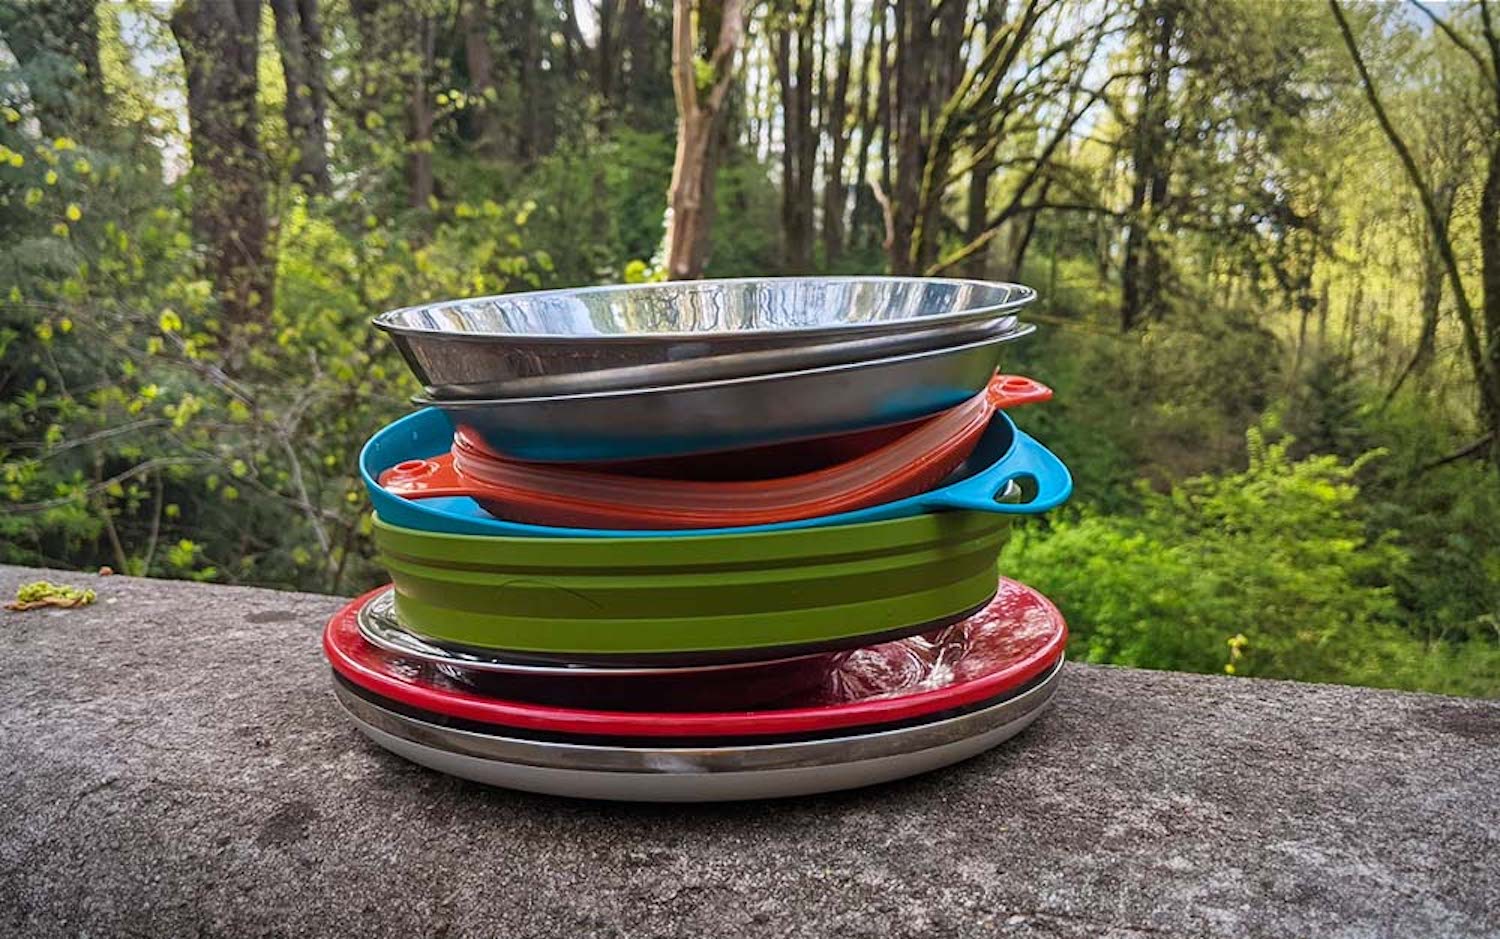 The Best Camping Dishes of 2022